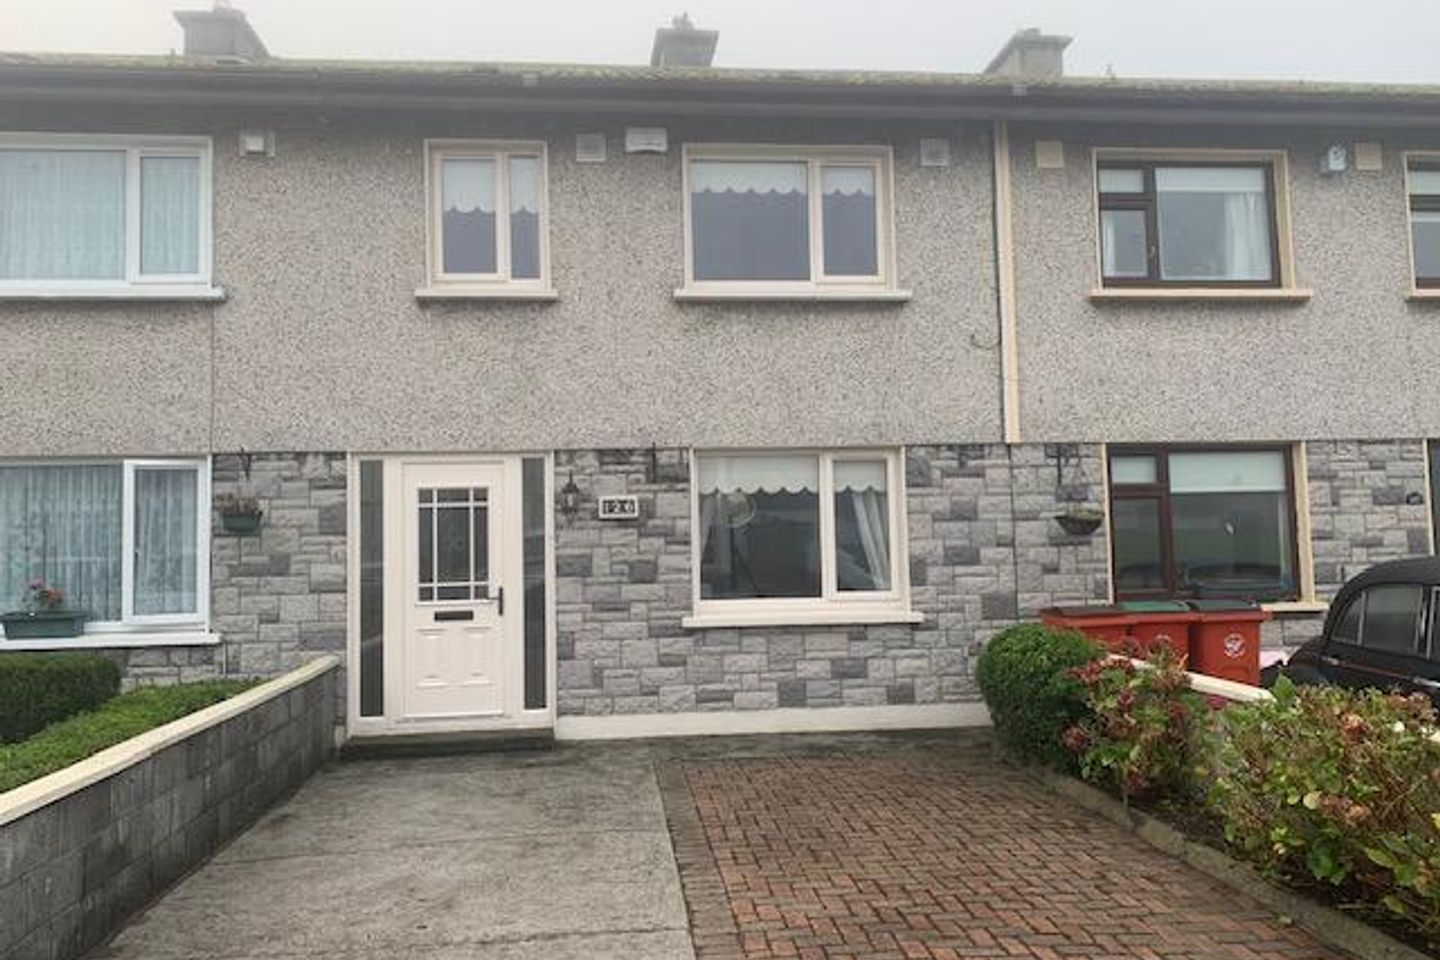 126 Inishannagh Park, Newcastle, Newcastle, Co. Galway, H91PPC9